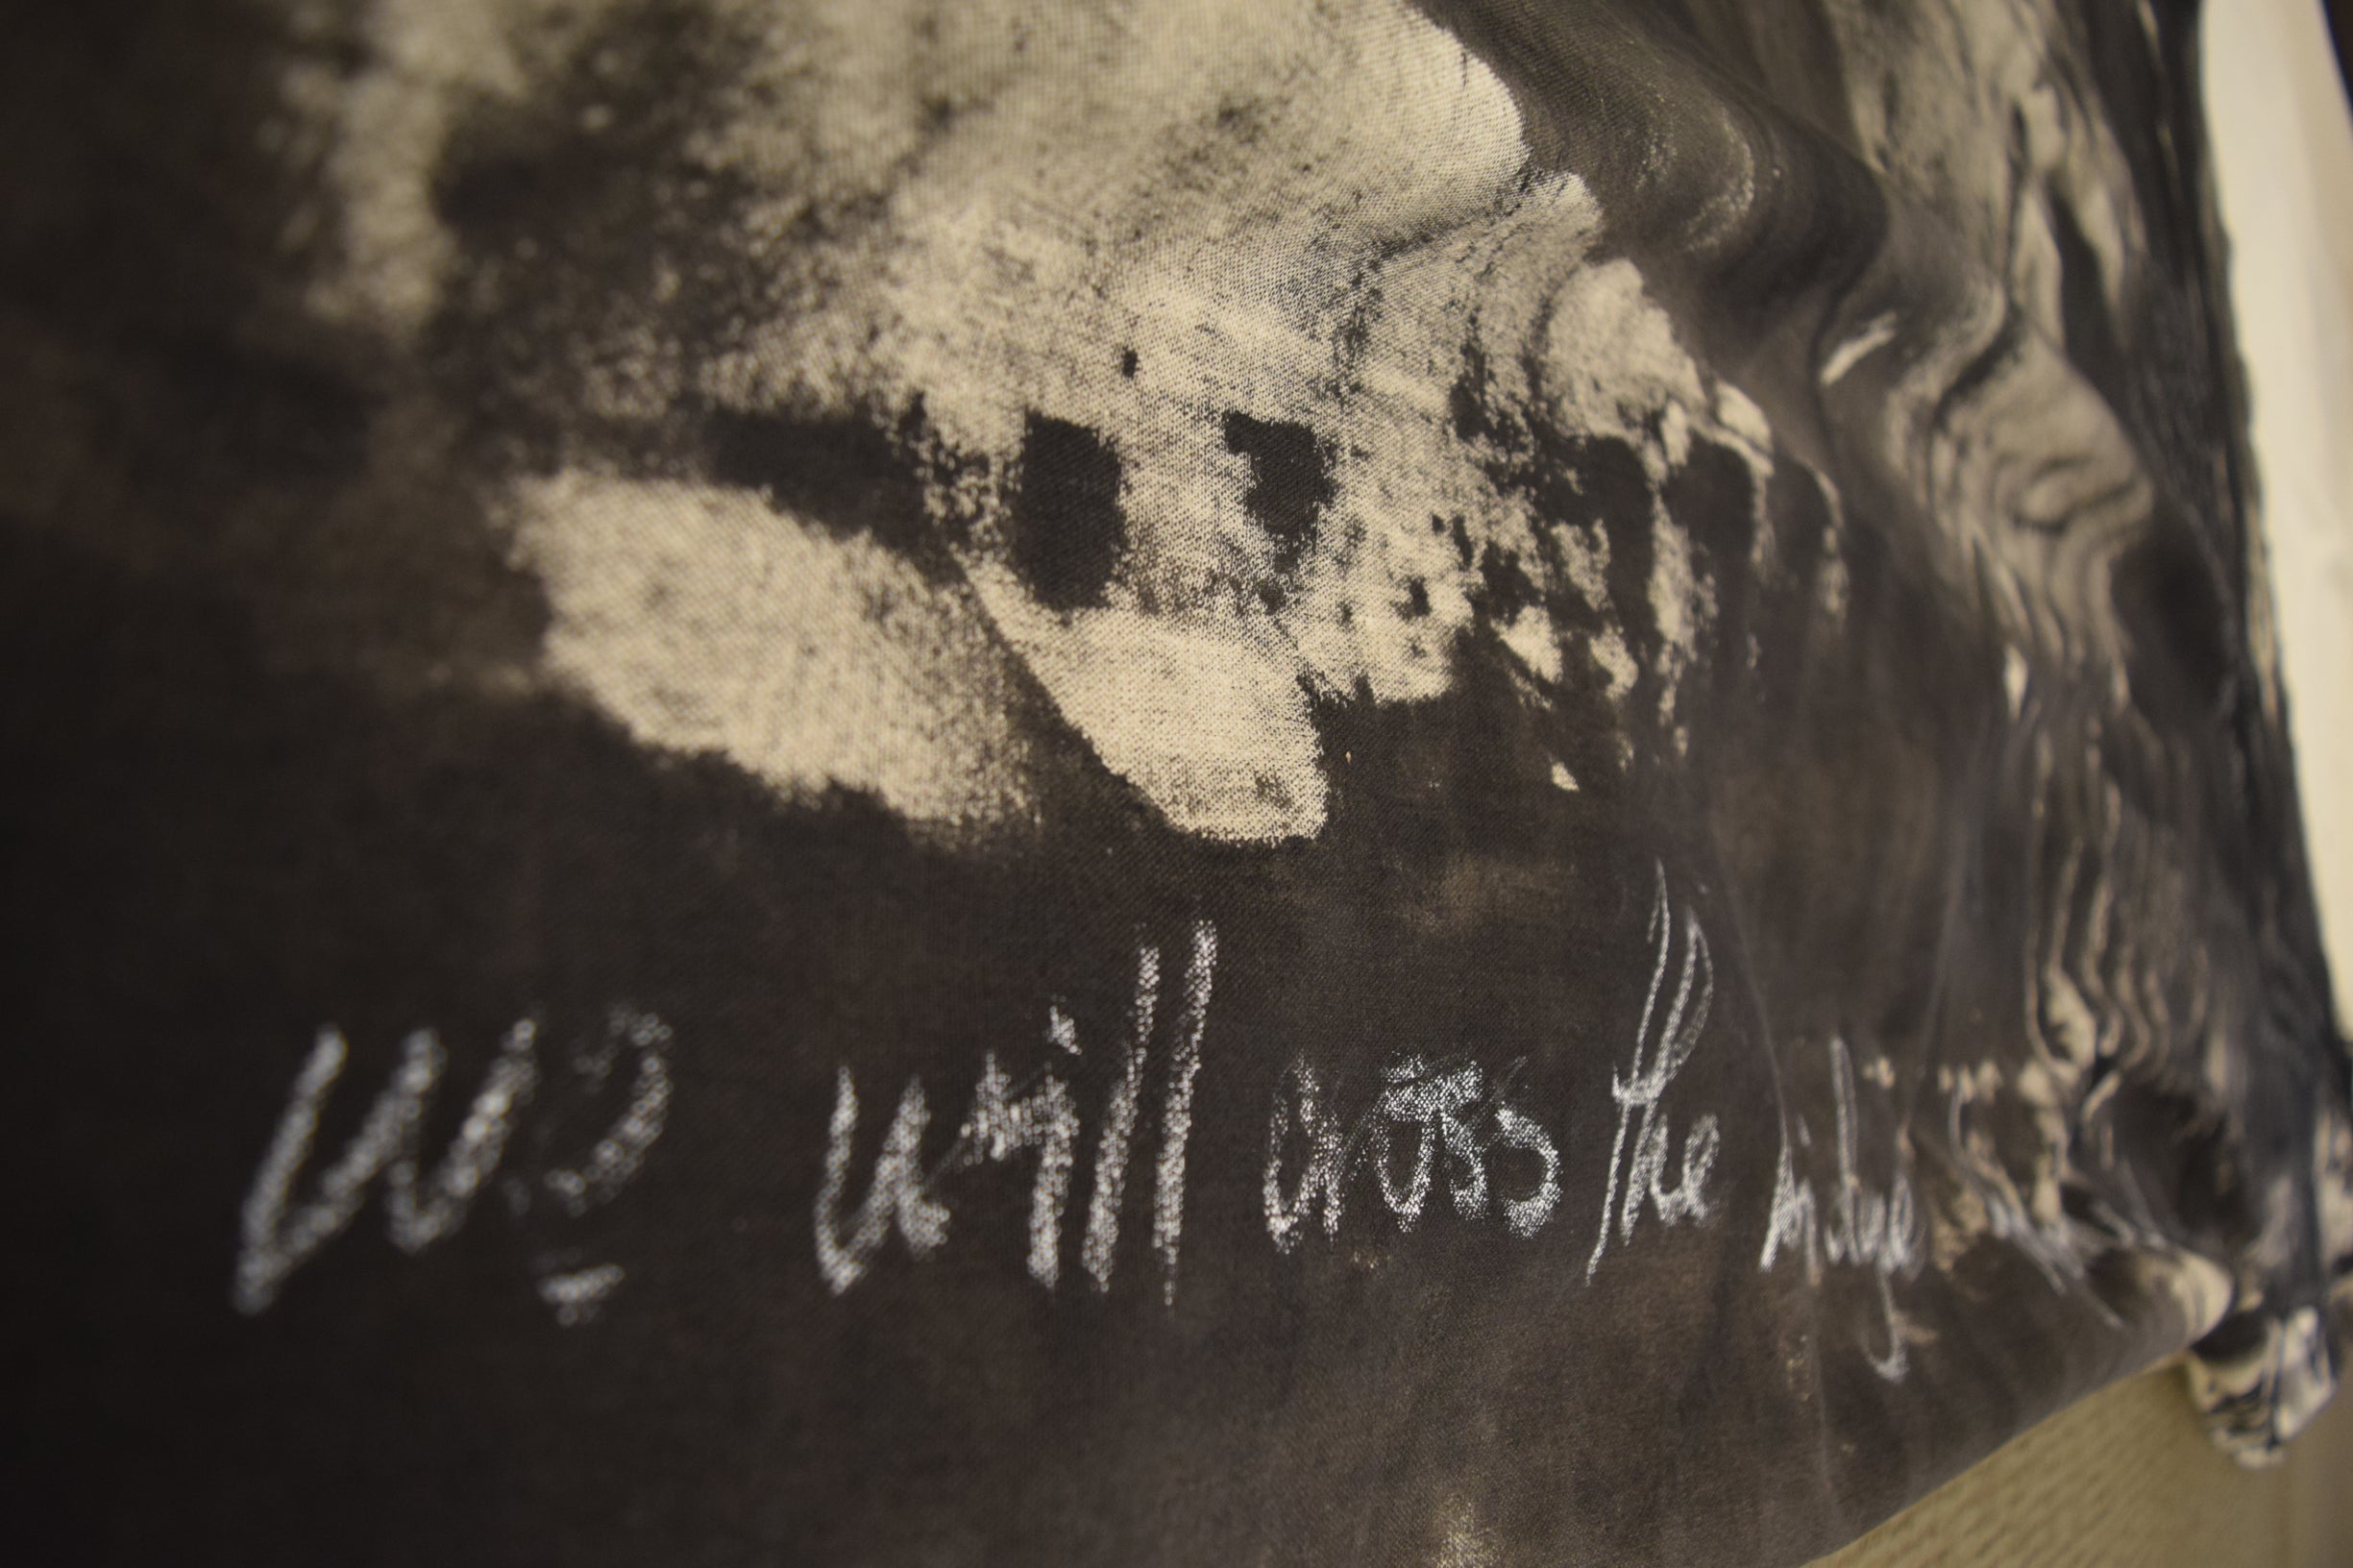 "we will cross the bridge together" written in white chalk over black paint on the canvas